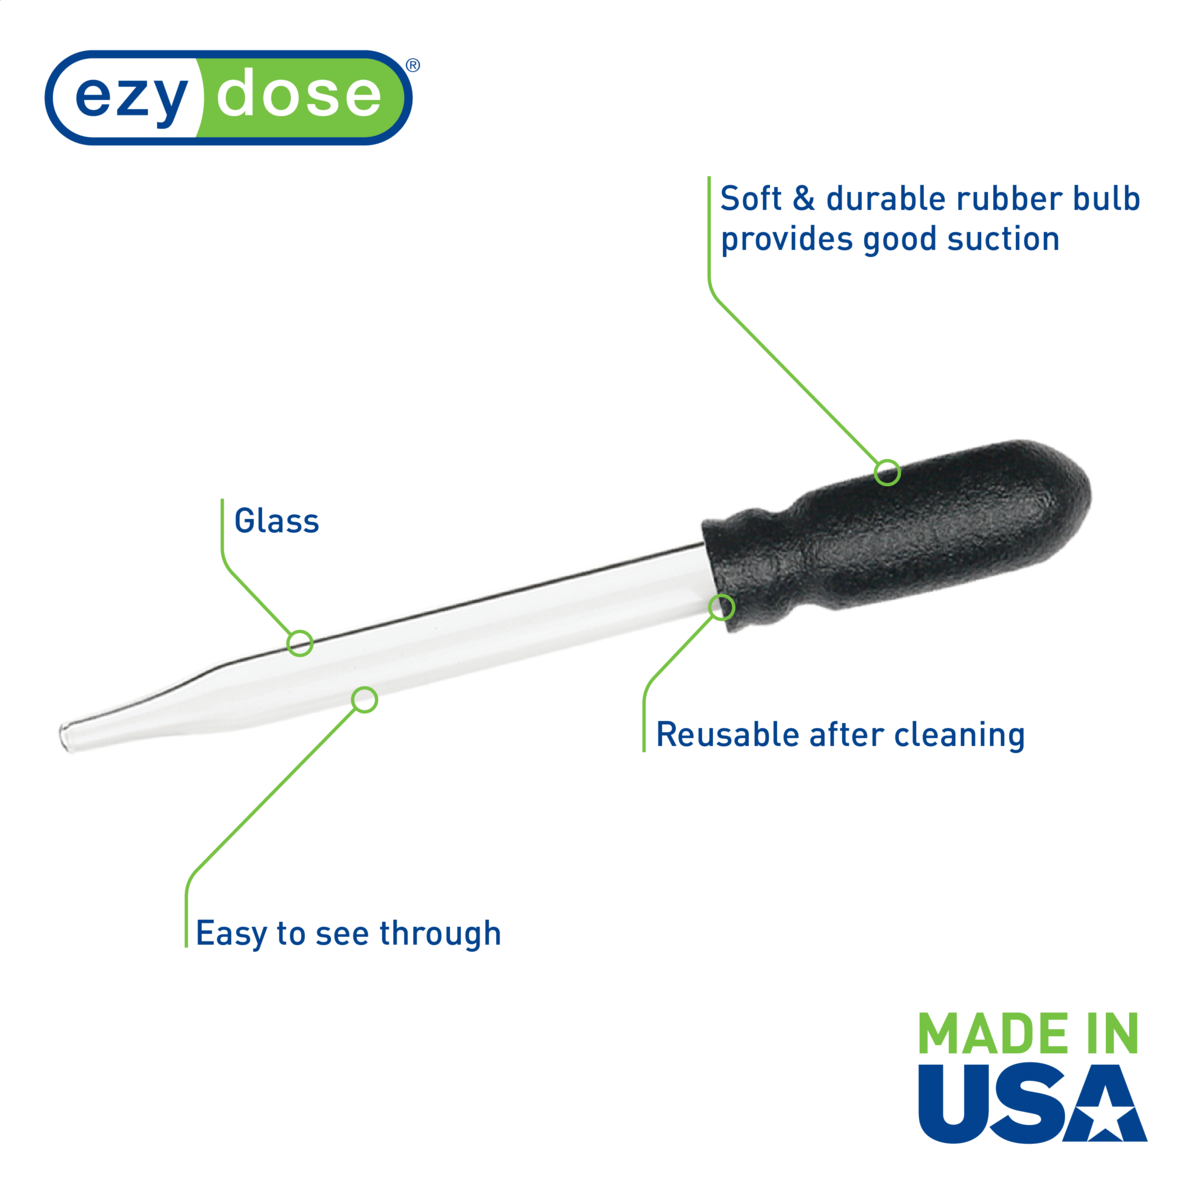 Glass dropper features soft durable rubber bulb that provides good suction and is reusable